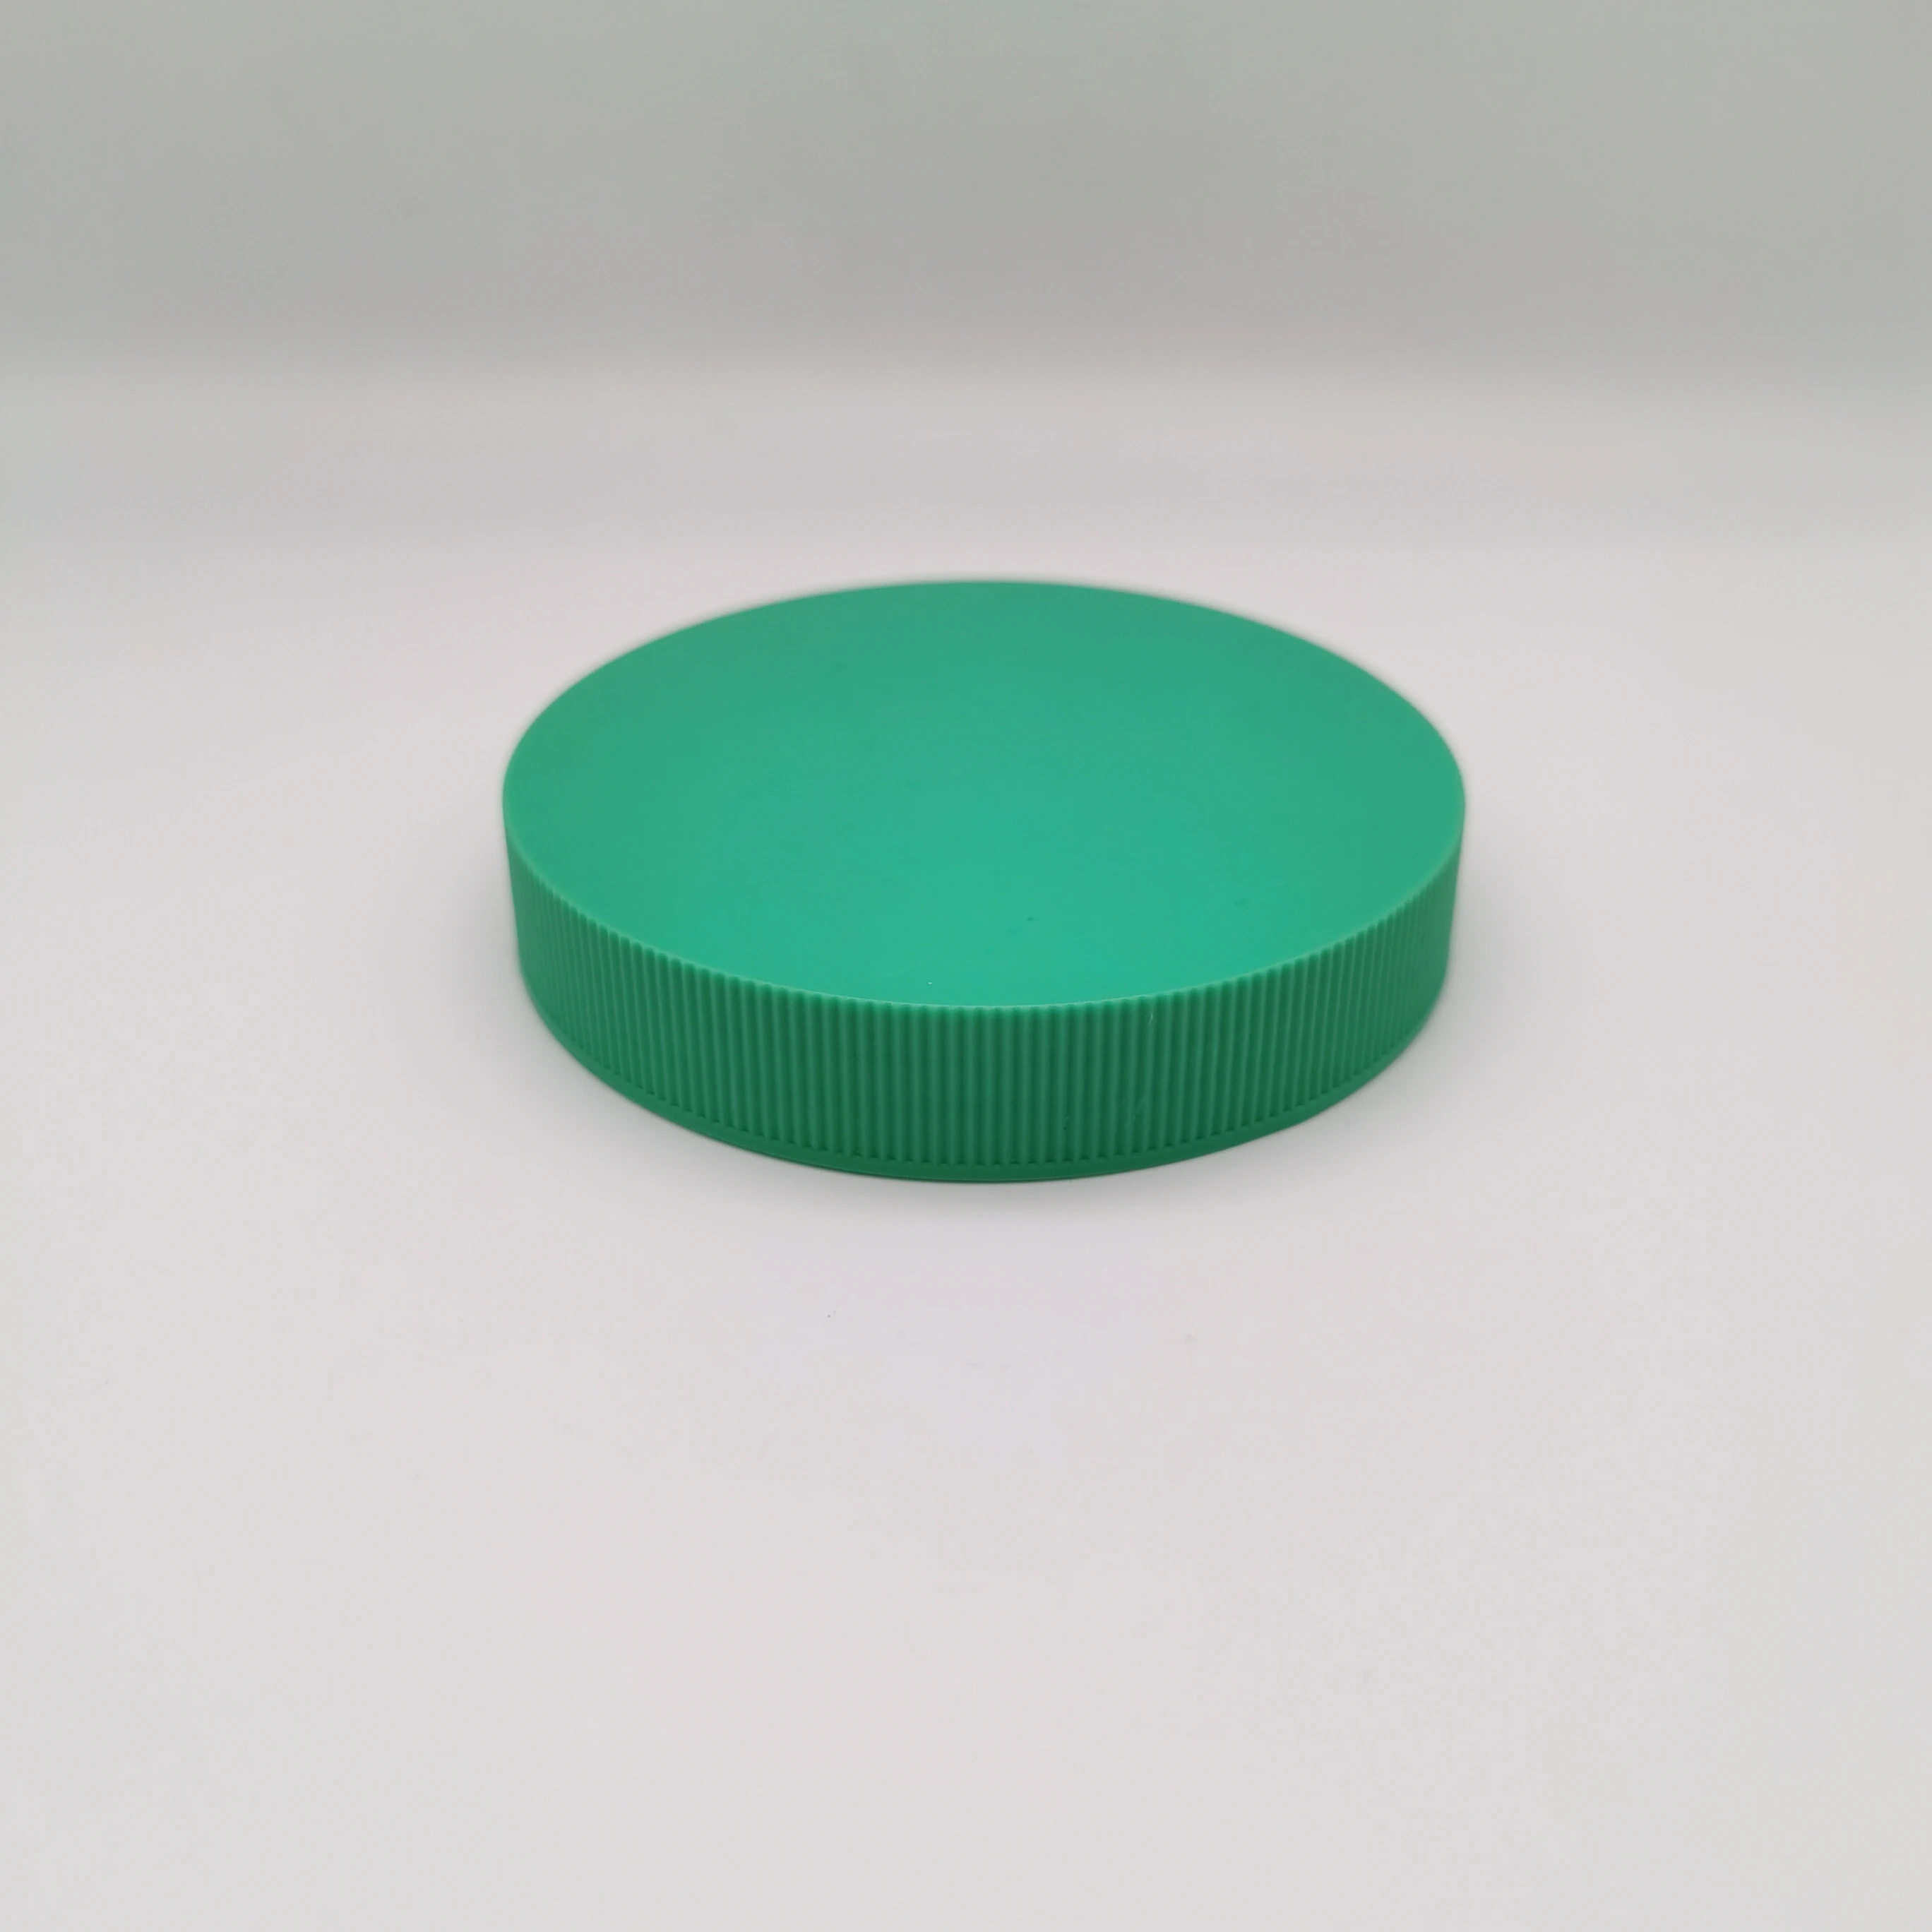 89mm ribbed plastic round shape screw cap in matte green color for PET jar